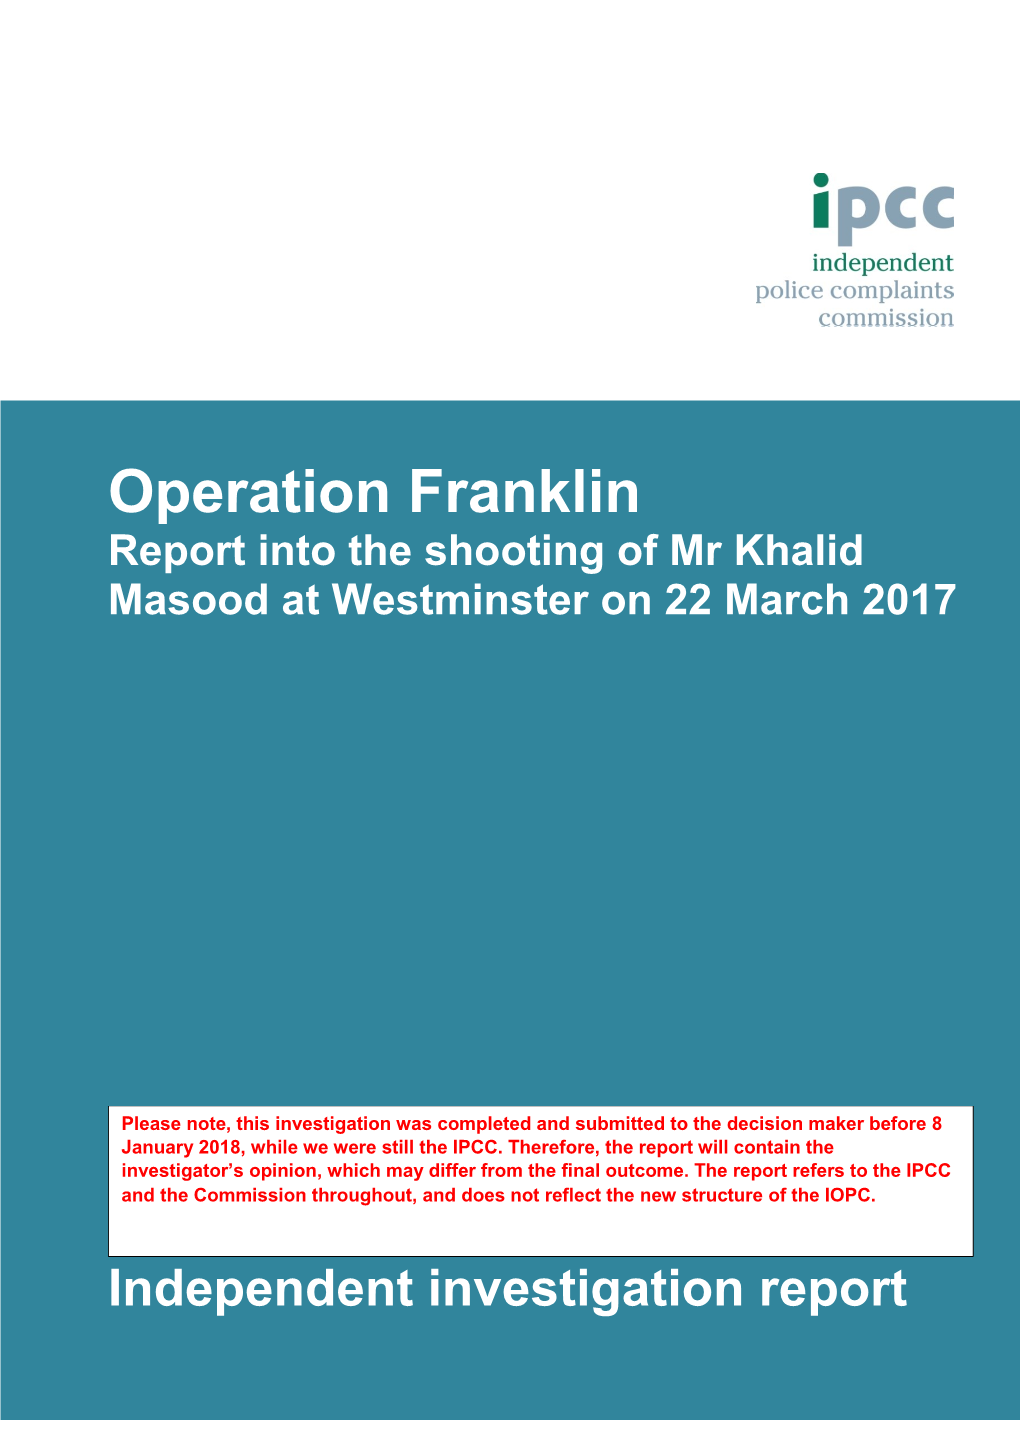 Operation Franklin Report Into the Shooting of Mr Khalid Masood at Westminster on 22 March 2017